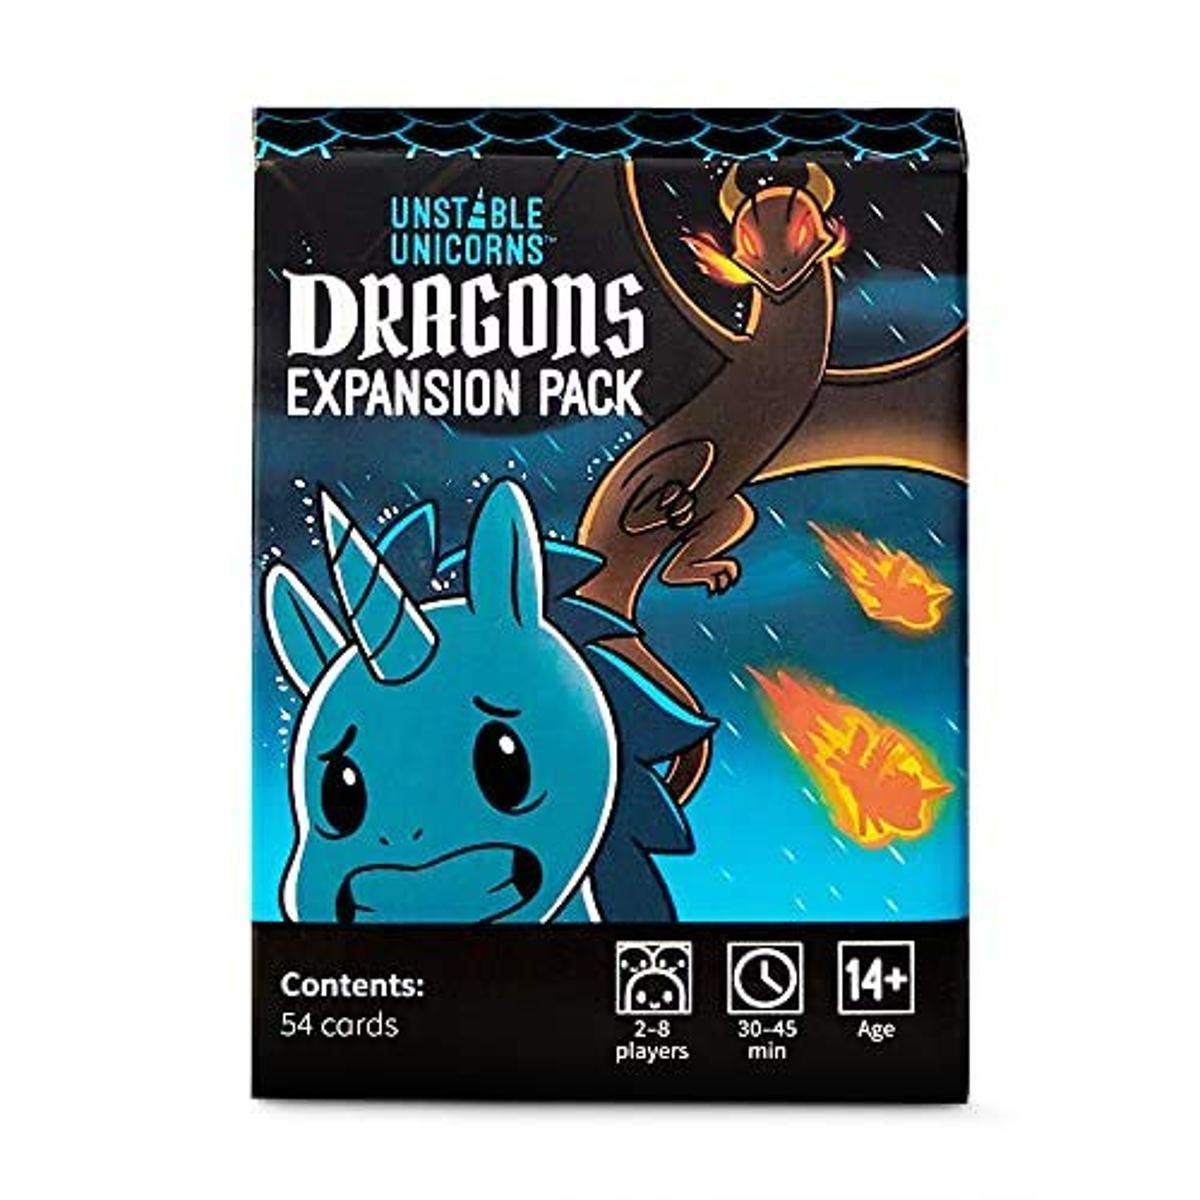 Unstable Unicorns Dragons Expansion Pack - Designed to be Added to Your Card Game